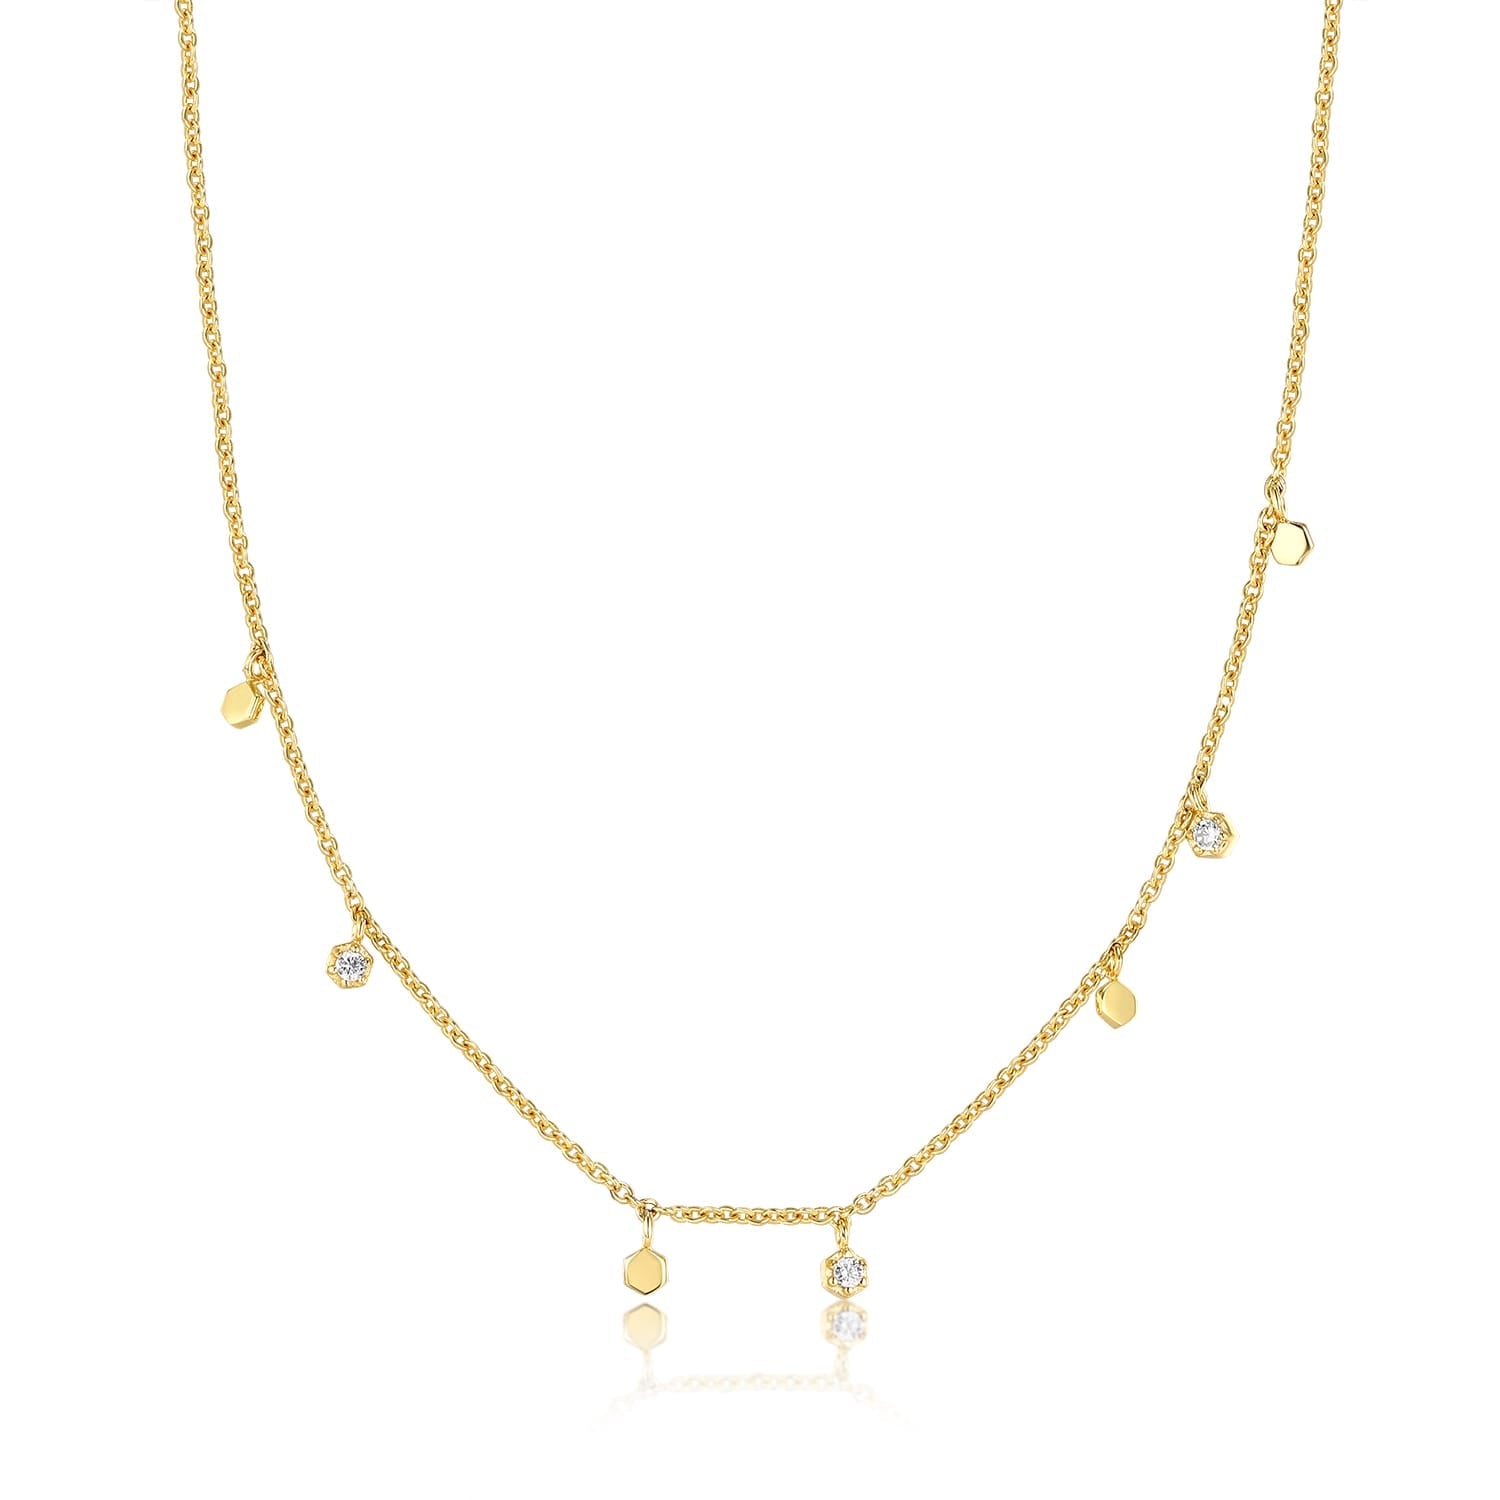 SoPHIA Necklace in 14K Gold Plated Silver and high-gloss white Zirconia - MIMUKA